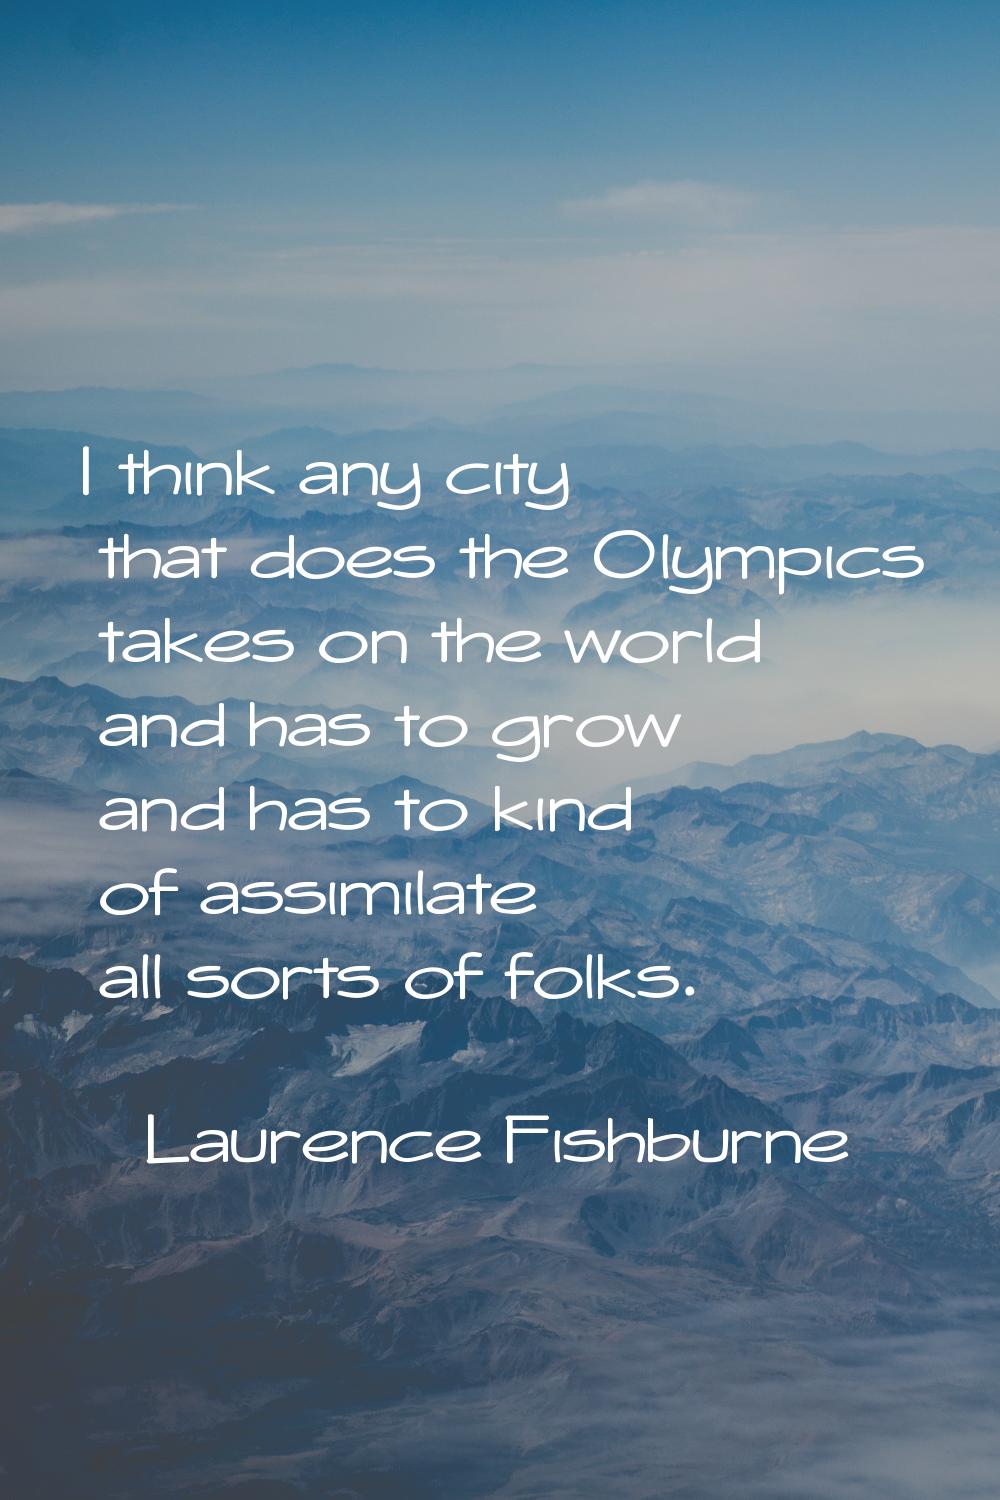 I think any city that does the Olympics takes on the world and has to grow and has to kind of assim